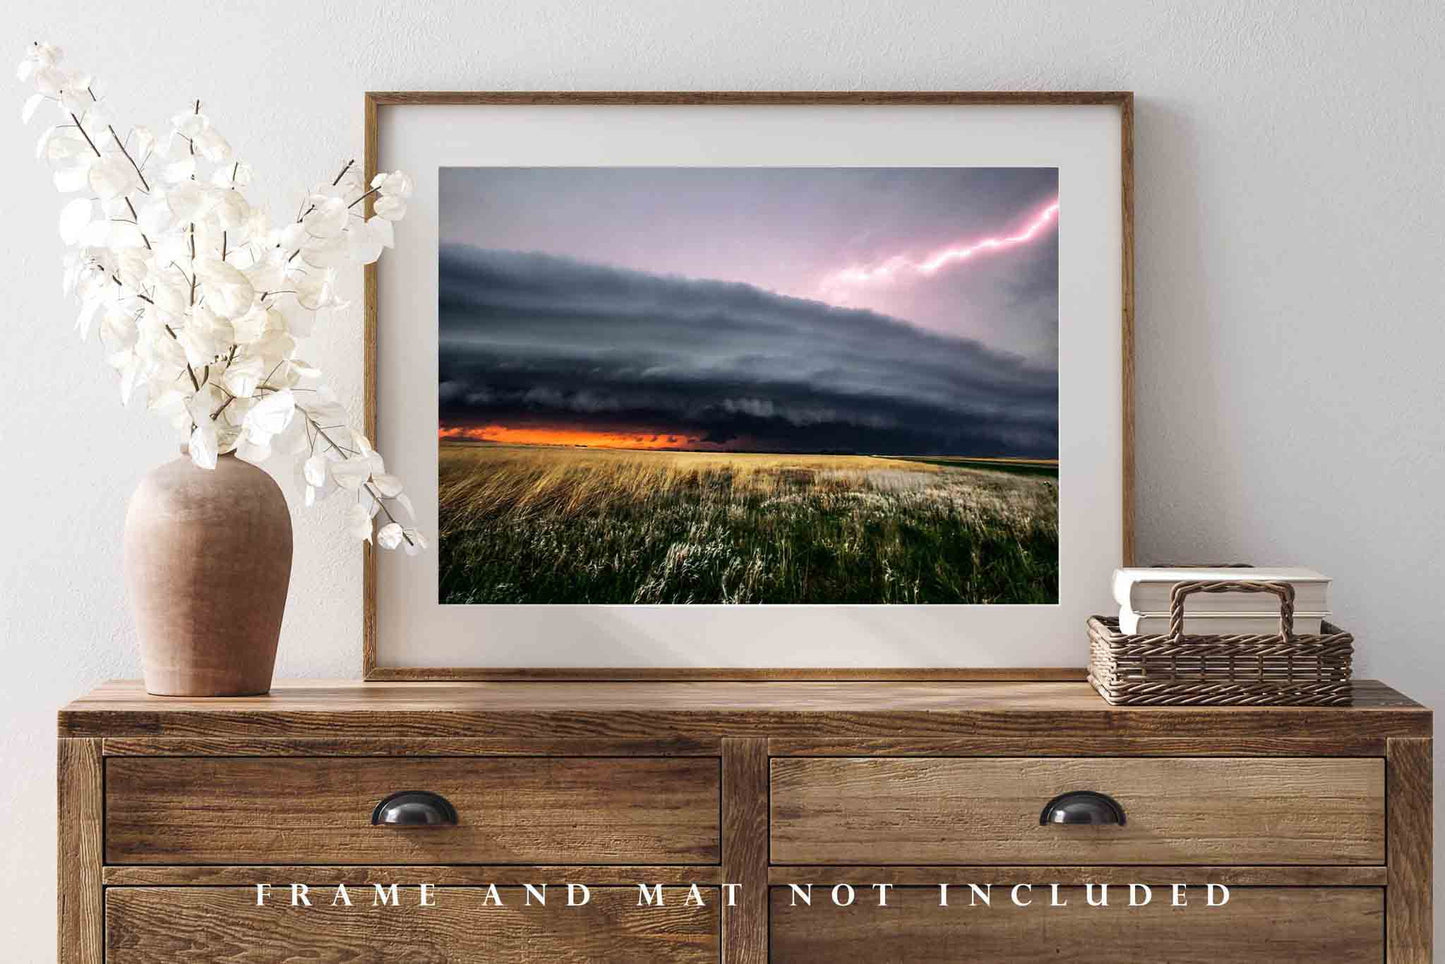 Storm Photography Print - Wall Art Picture of Thunderstorm and Lightning at Sunset Over Kansas Prairie Weather Scenery Midwest Decor